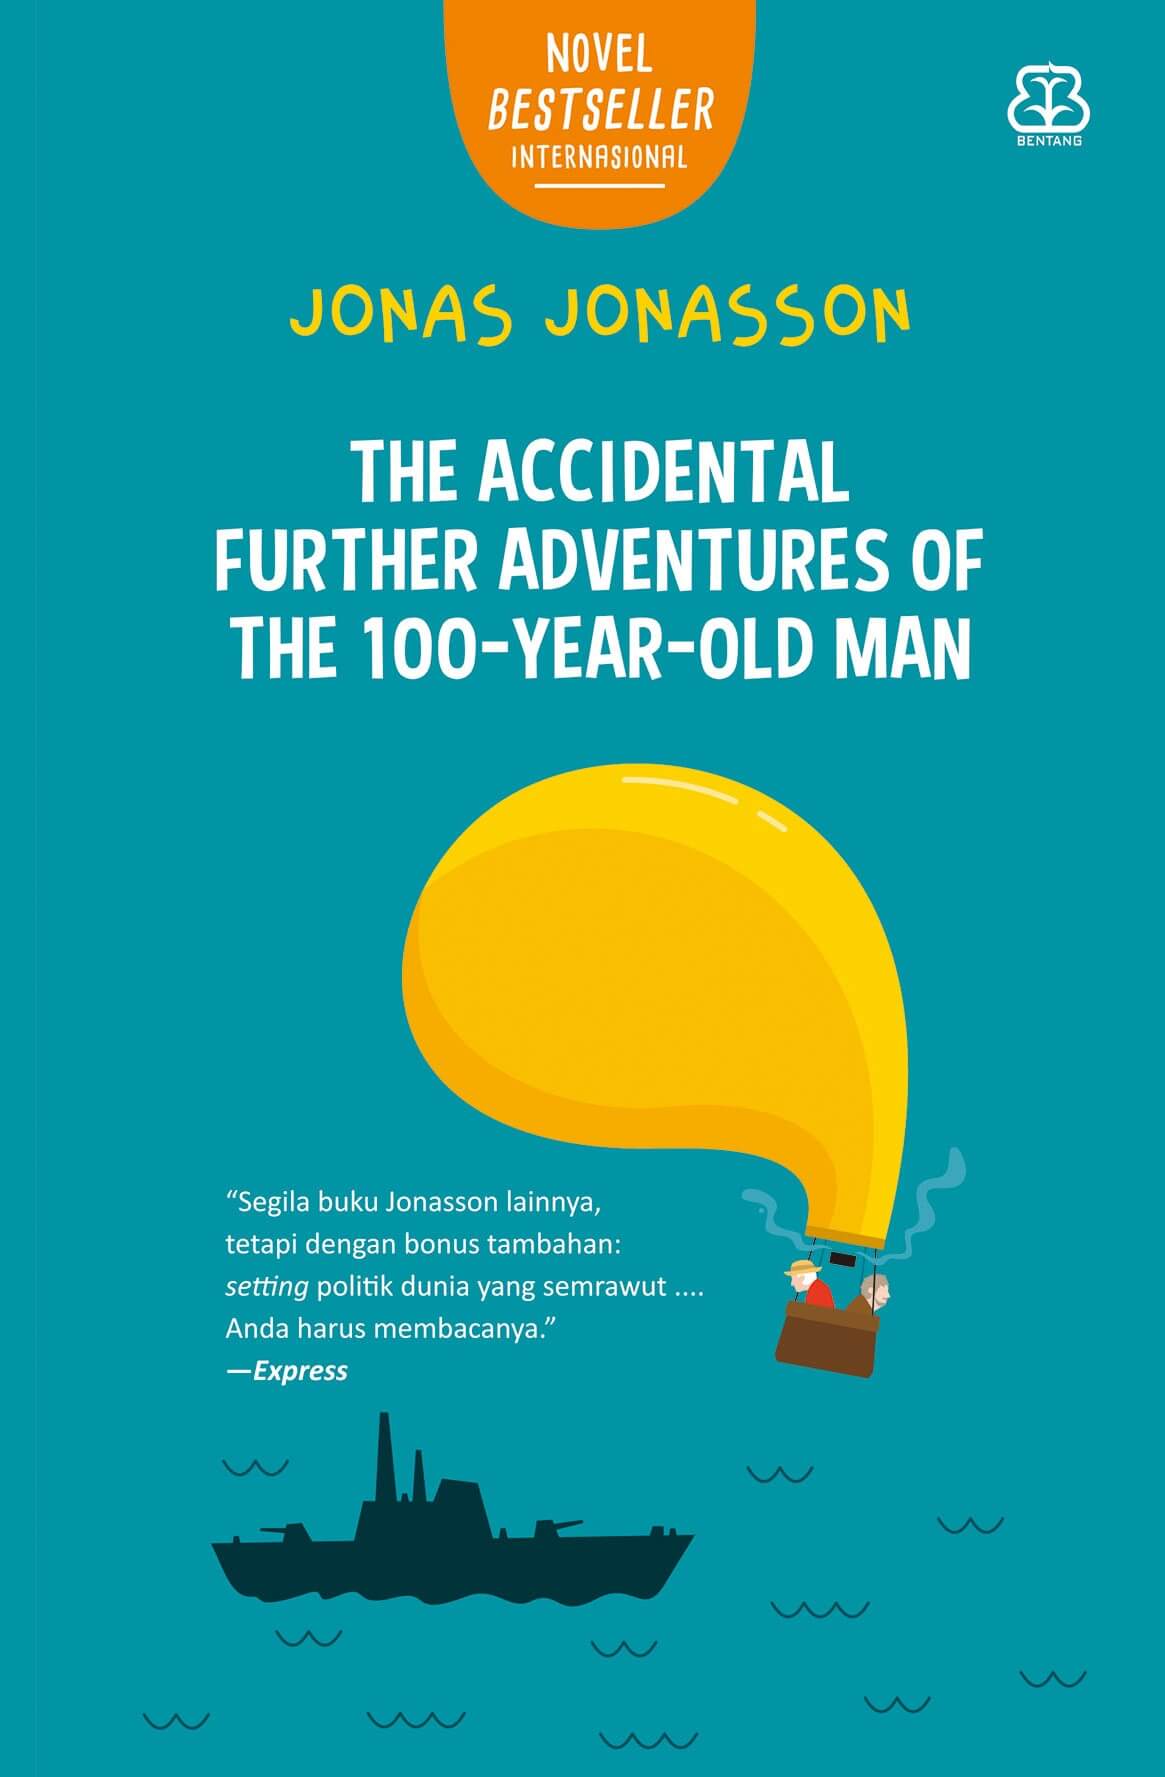 THE ACCIDENTAL FURTHER ADVENTURES OF THE 100-YEAR-OLD MAN